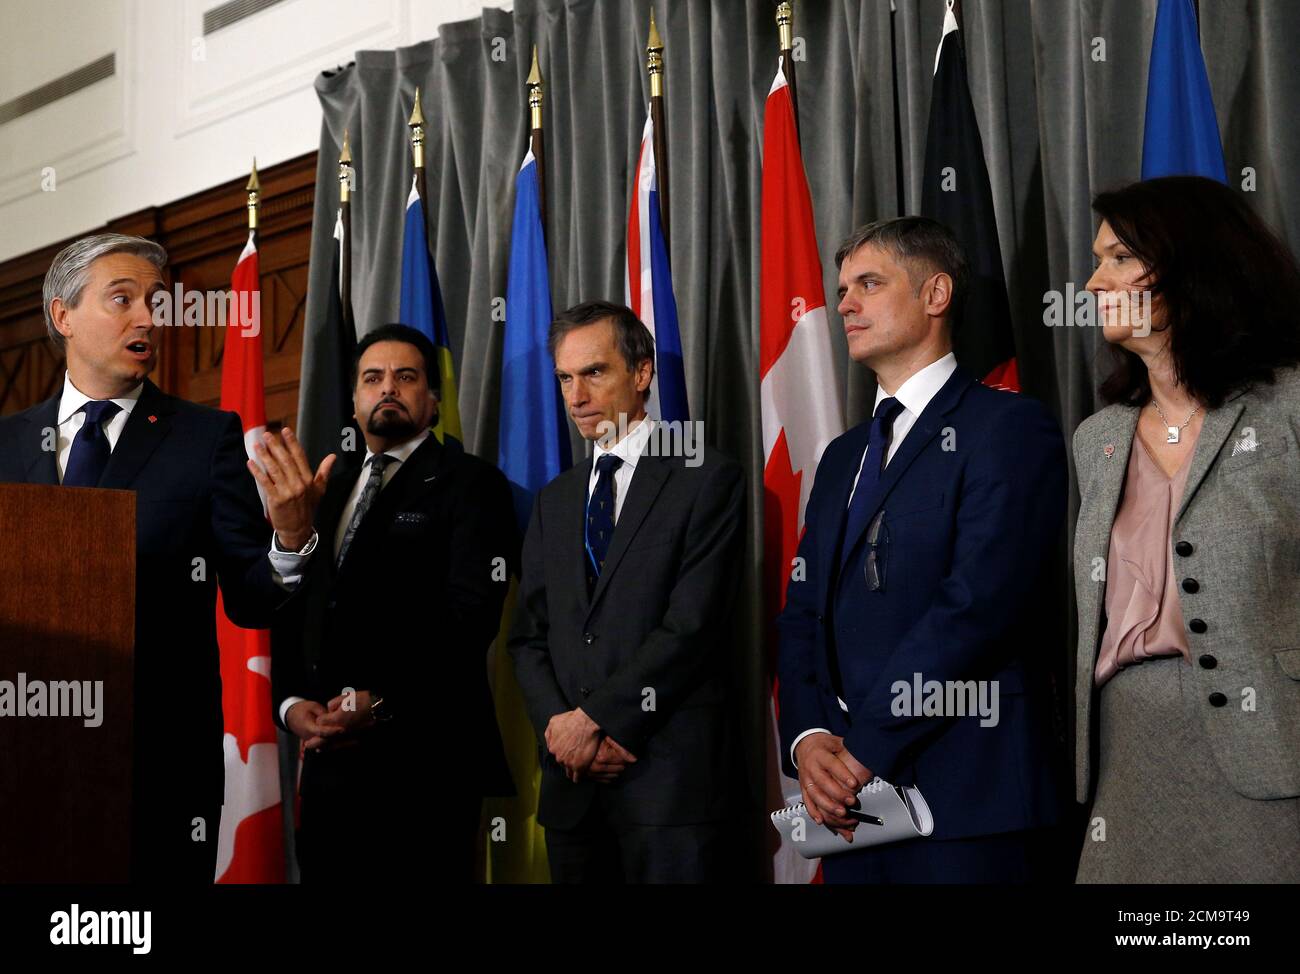 Canada's Minister of Foreign Affairs Francois-Philippe Champagne speaks during a news conference, standing next to Sweden's Foreign Minister Ann Linde, Ukraine's Foreign Minister Vadym Prystaiko, Afghanistan's acting Foreign Minister Idrees Zaman and British MP Andrew Murrison, after a meeting of the International Coordination and Response Group for the families of the victims of the Ukraine International flight which crashed in Iran, at the High Commission of Canada in London, Britain January 16, 2020.     REUTERS/Henry Nicholls Stock Photo